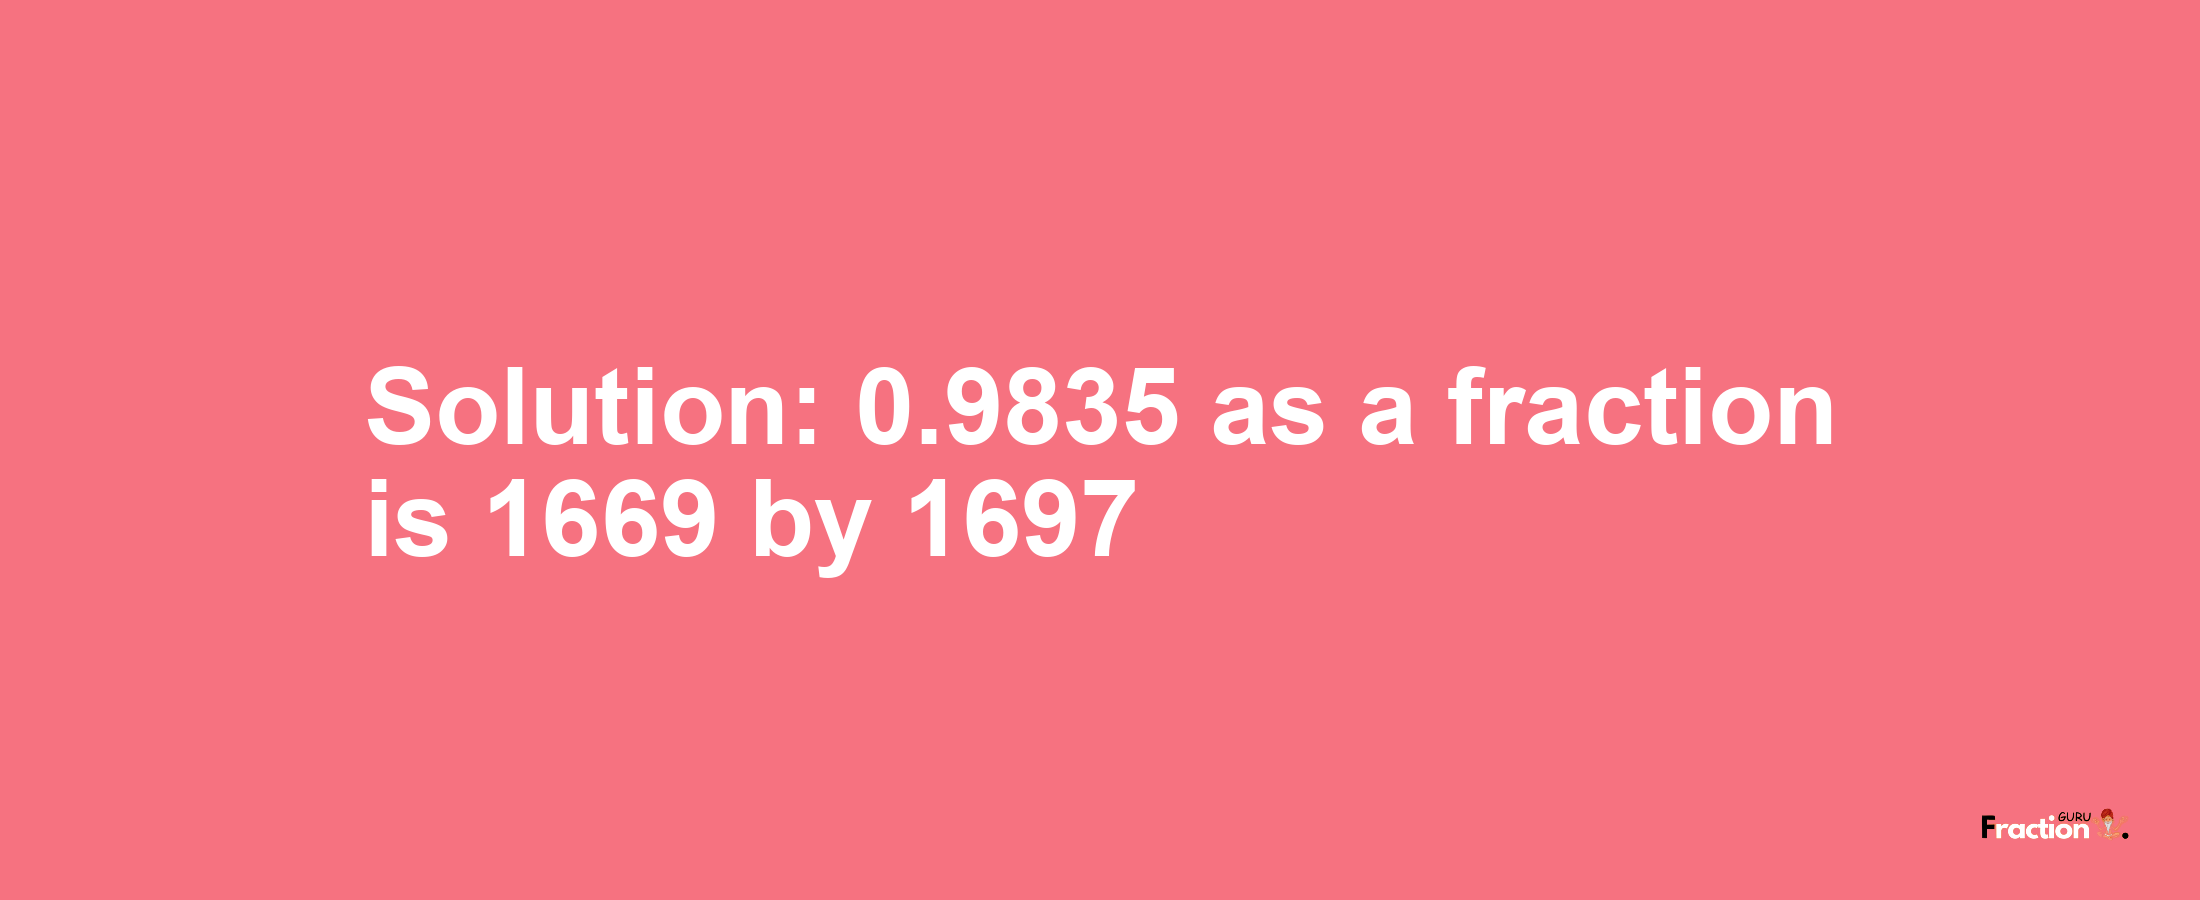 Solution:0.9835 as a fraction is 1669/1697